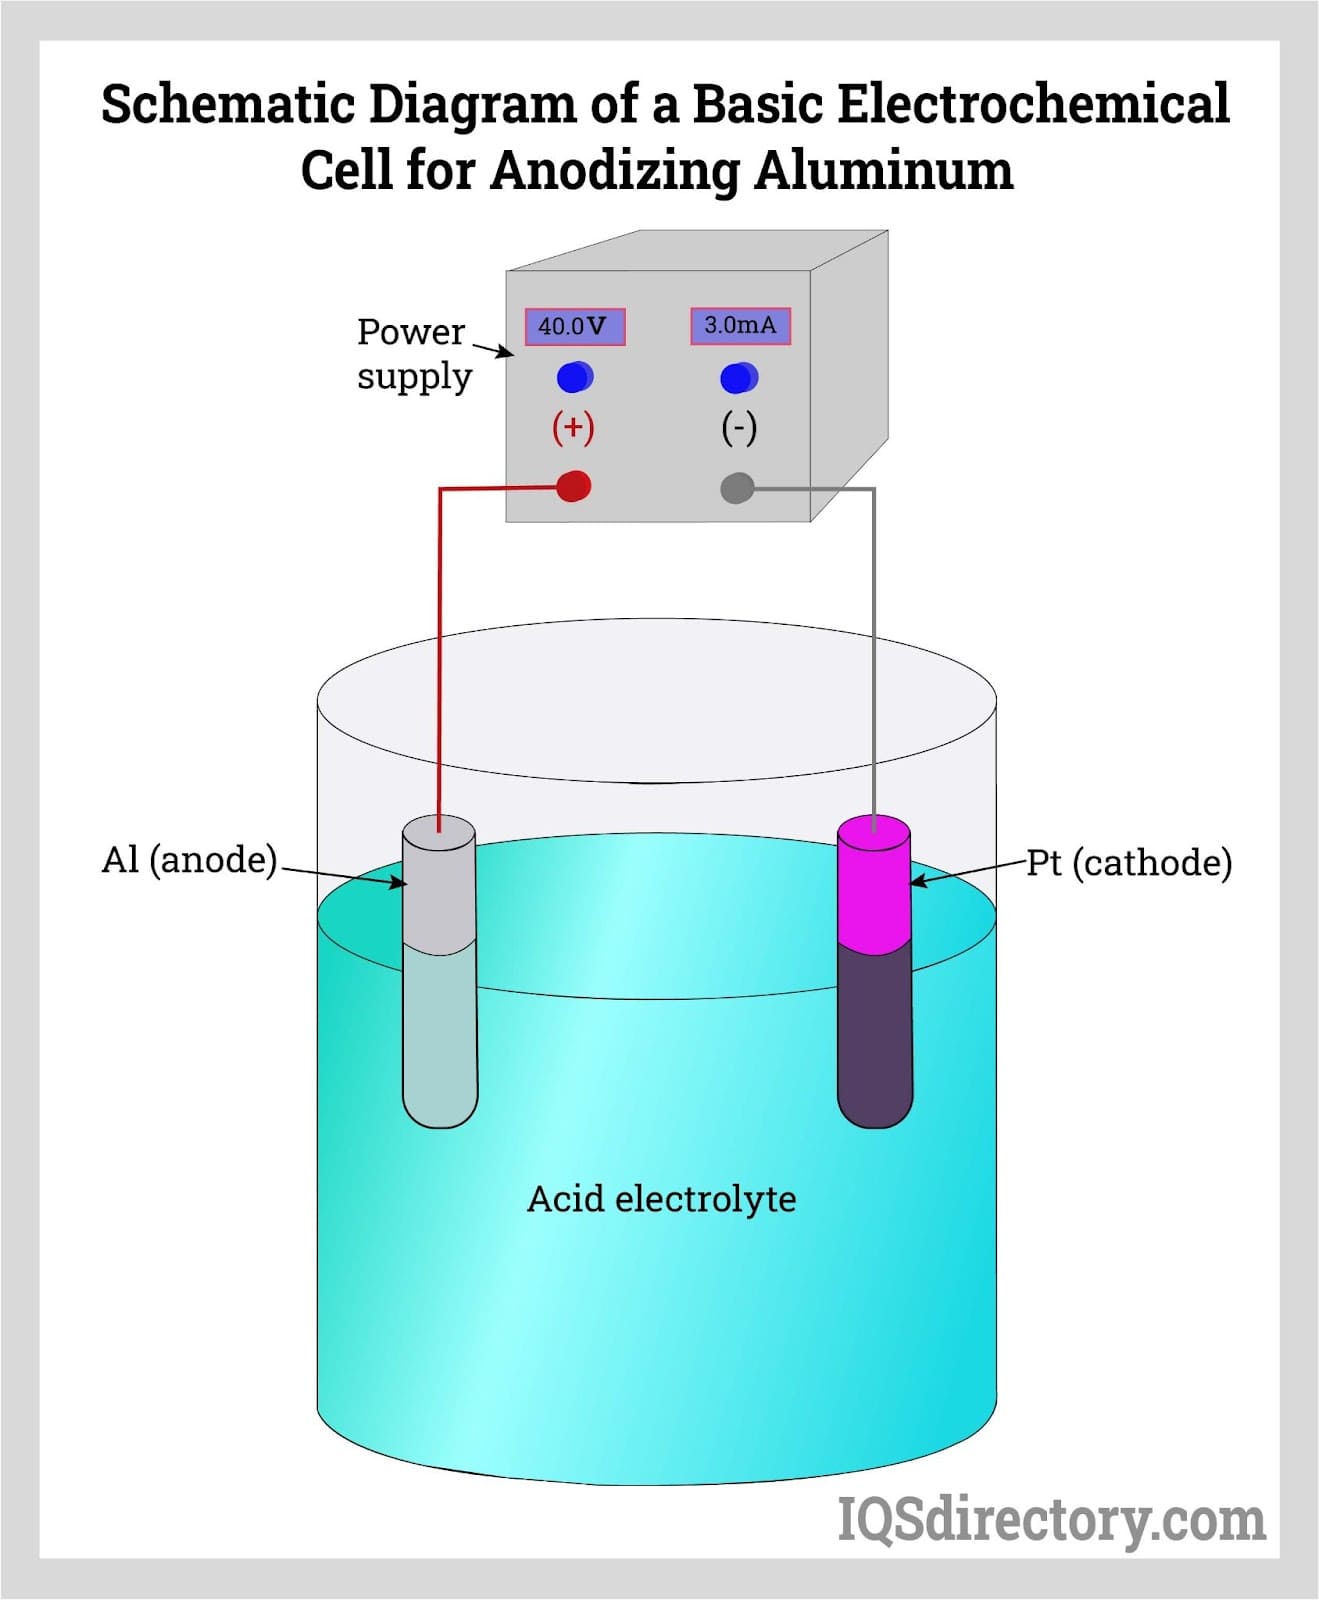 Schematic Diagram of a Basic Electrochemical Cell for Anodizing Aluminum